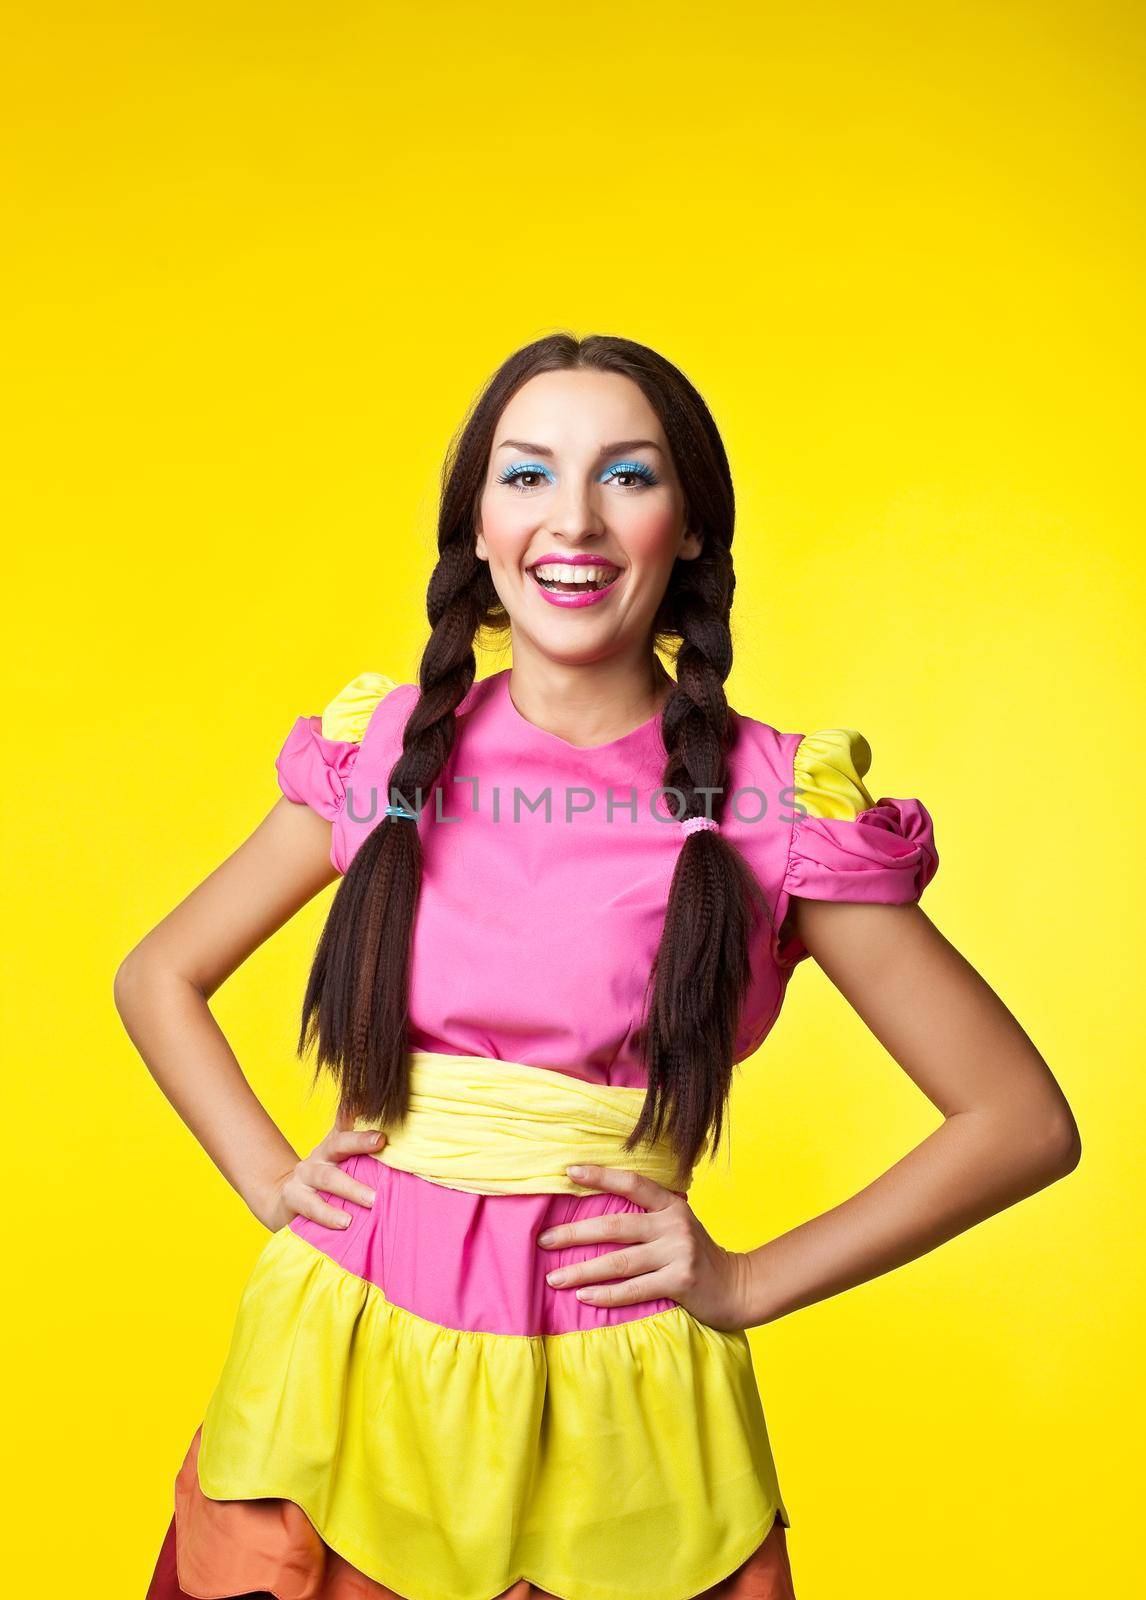 Young cute girl in doll costume and pin-up make-up smile on yellow background